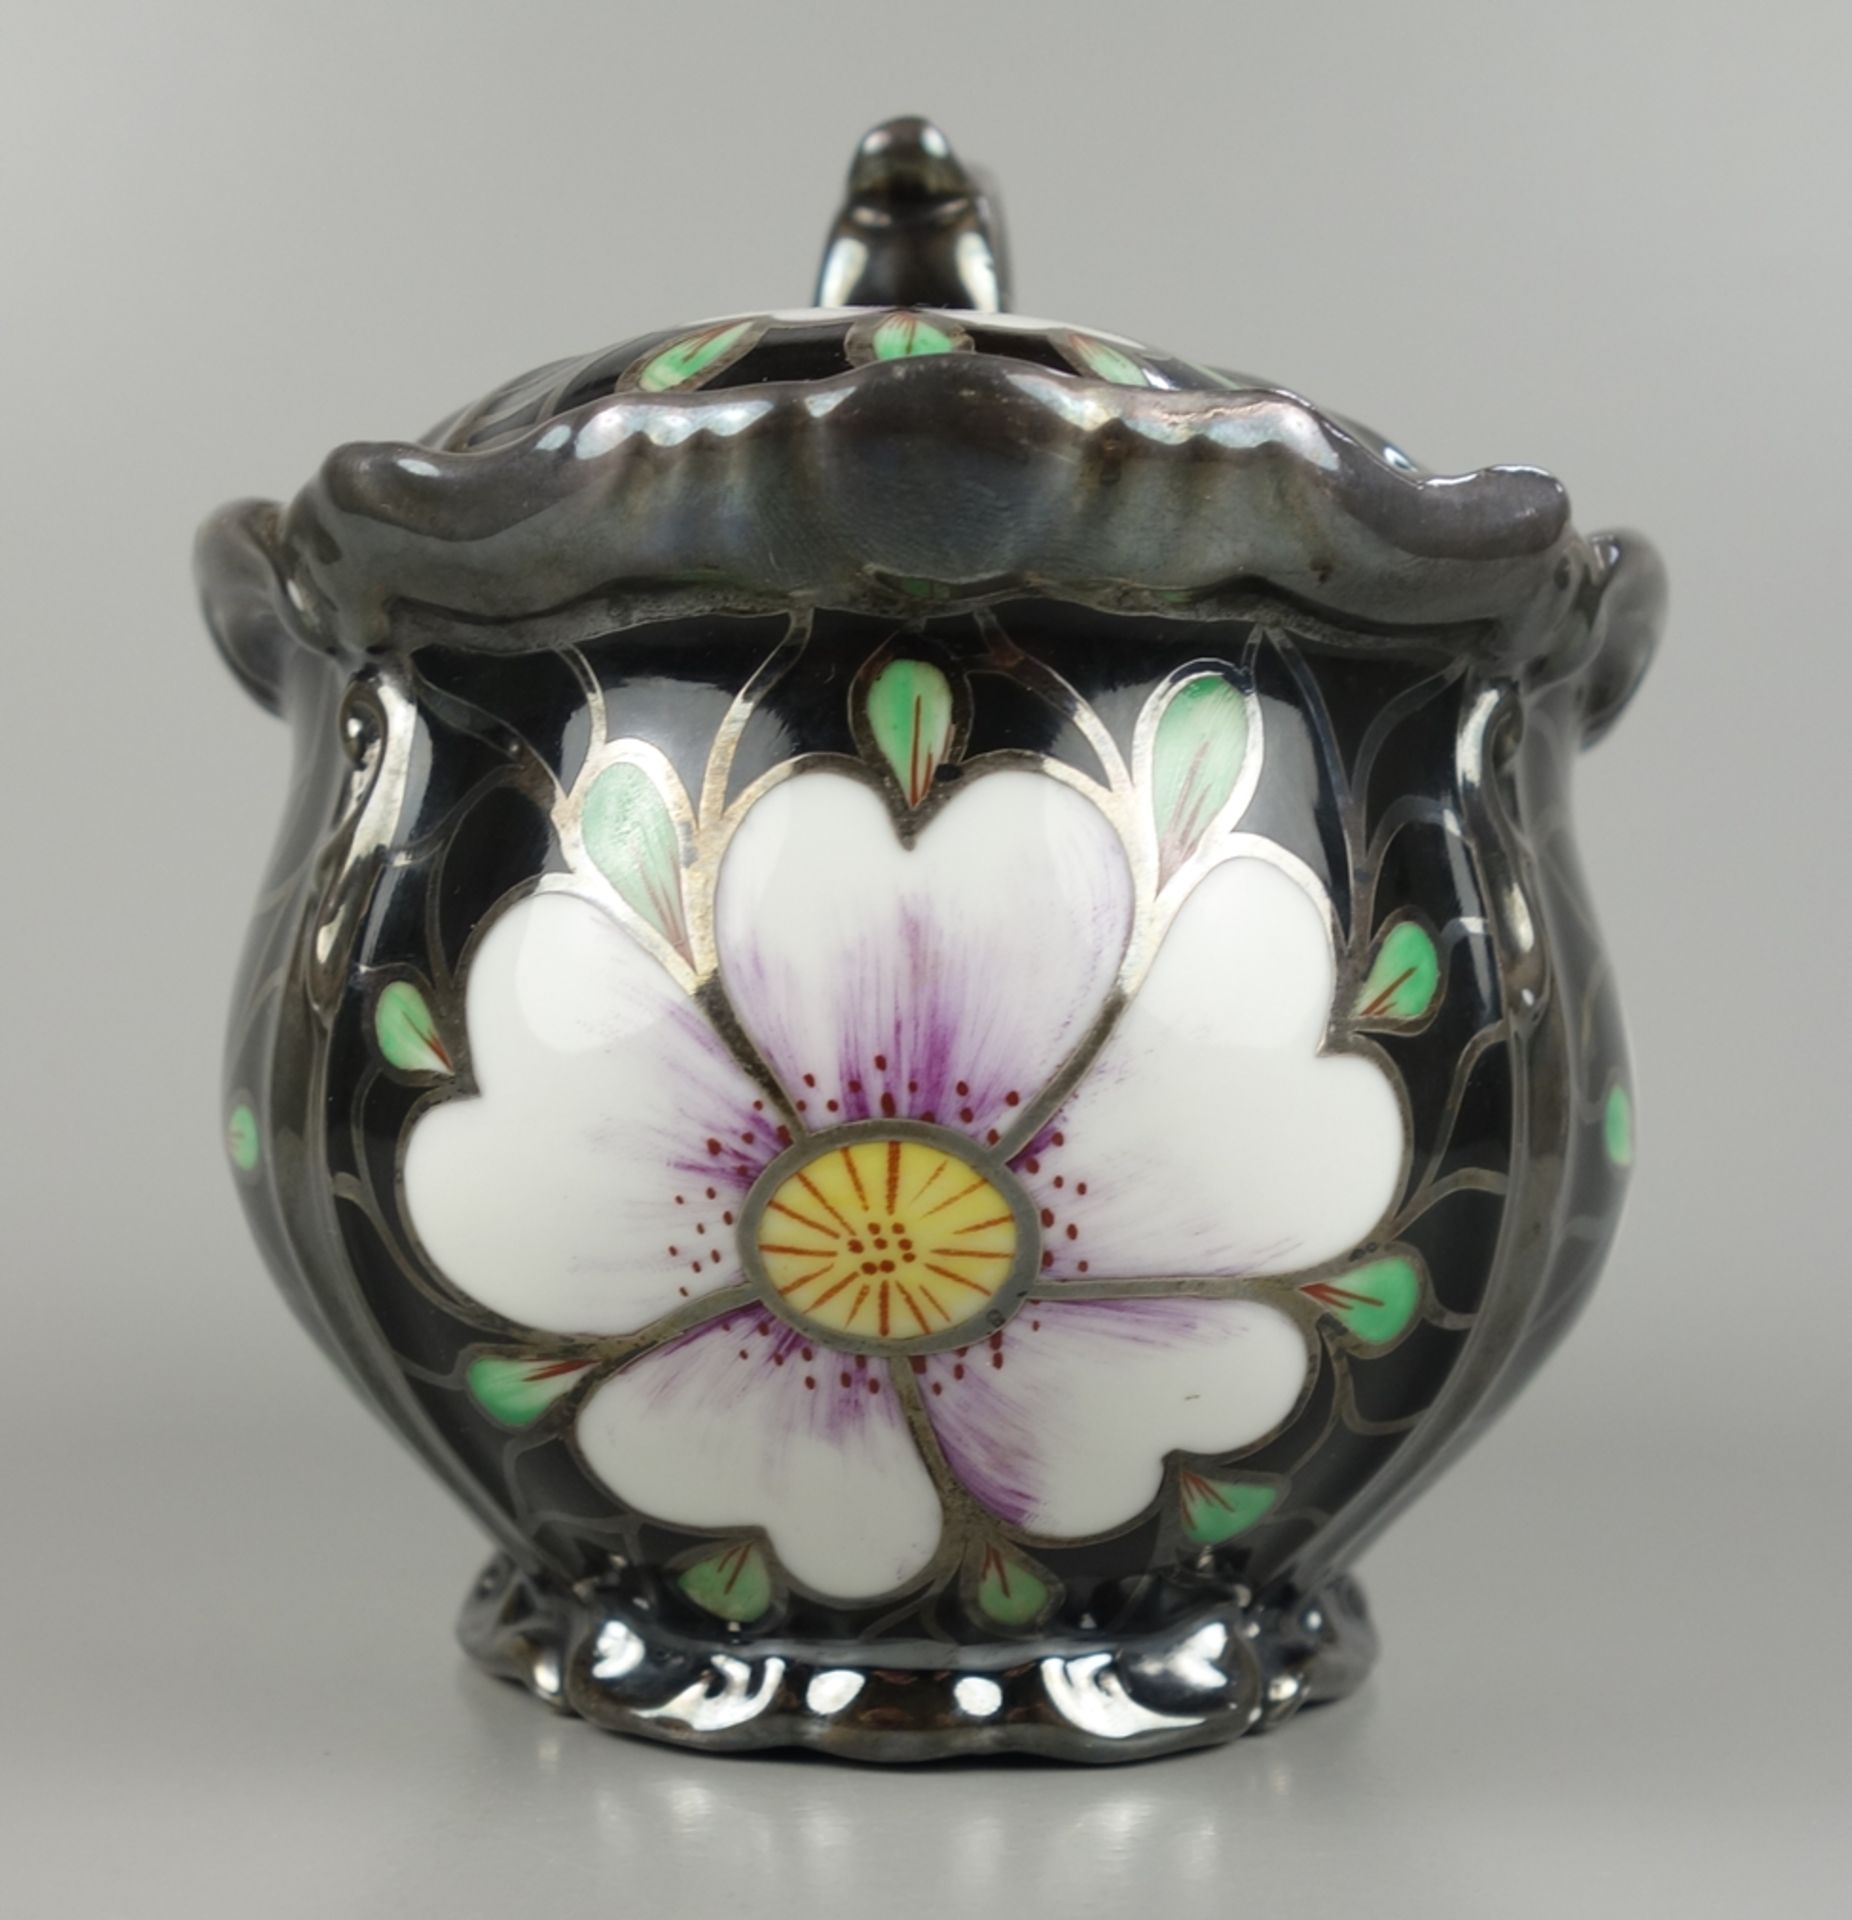 Porcelain box with silver overlay, Württemberg porcelain, 1920/1930s - Image 2 of 4